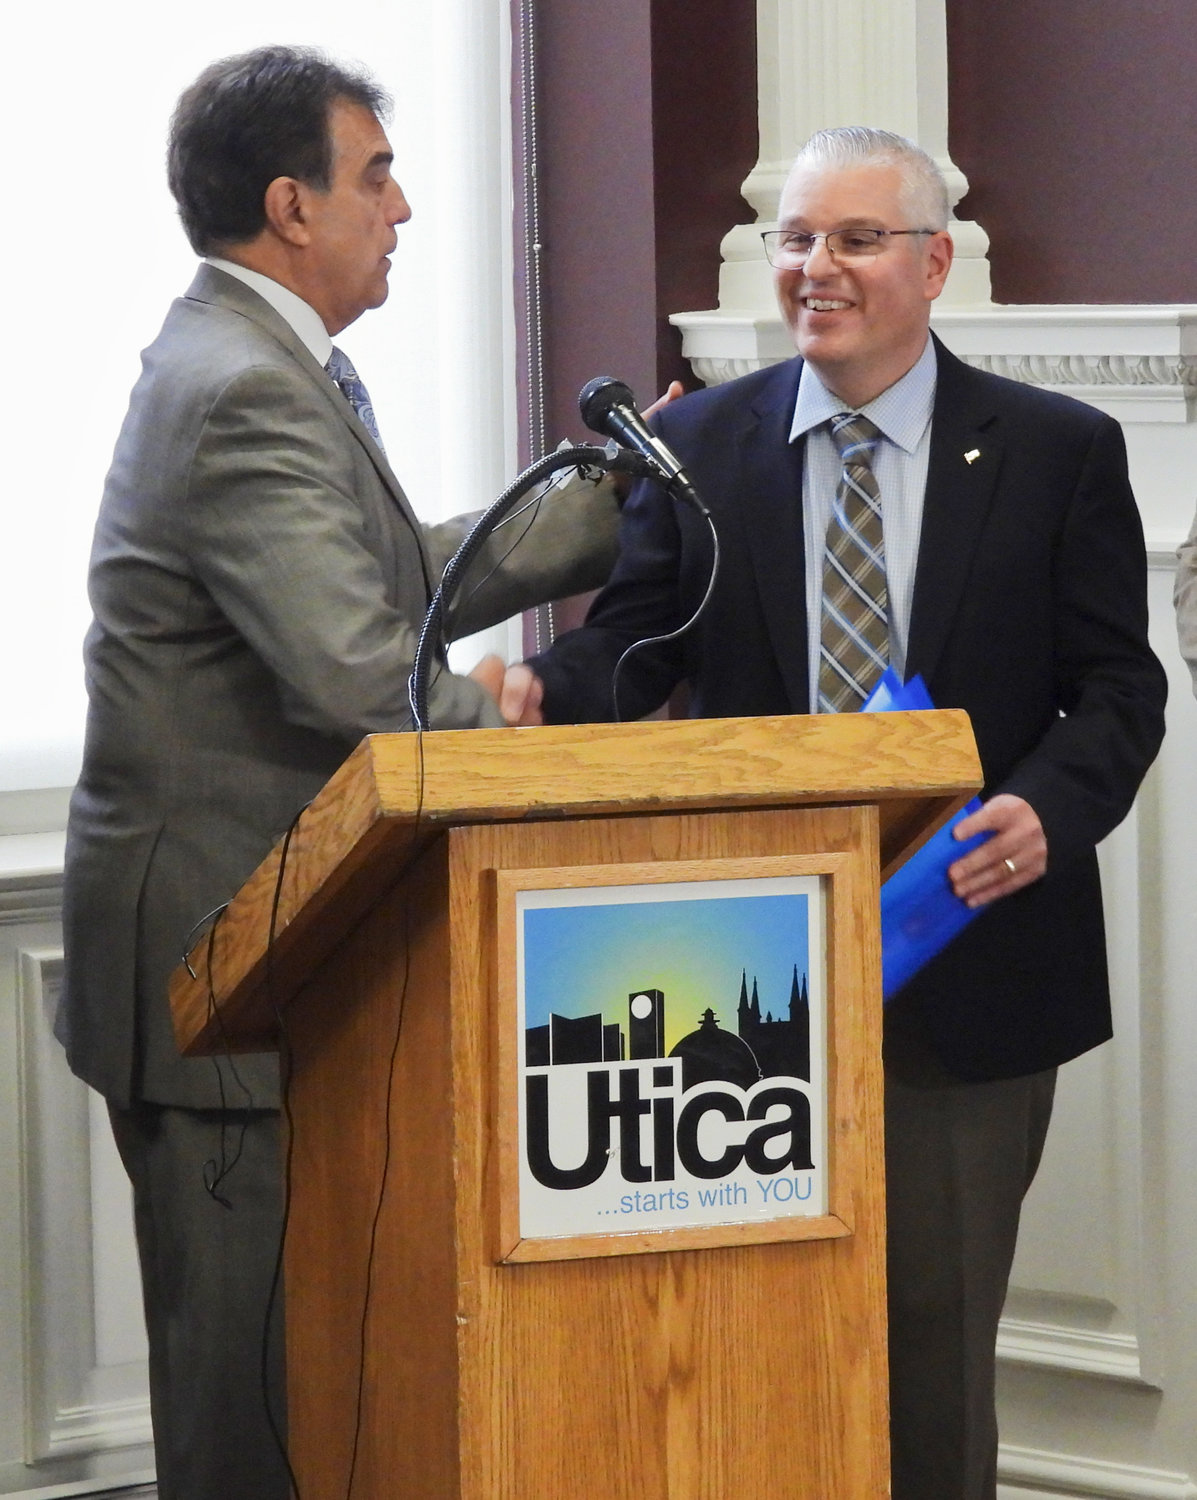 Utica Mayor Robert Palmieri shakes hands with Barton & Loguidice President and CEO John Brusa, thanking B & L for its commitment and investment in Utica. B & L will be moving into the former Commercial Travelers building at 70 Genesee Street in in Utica.